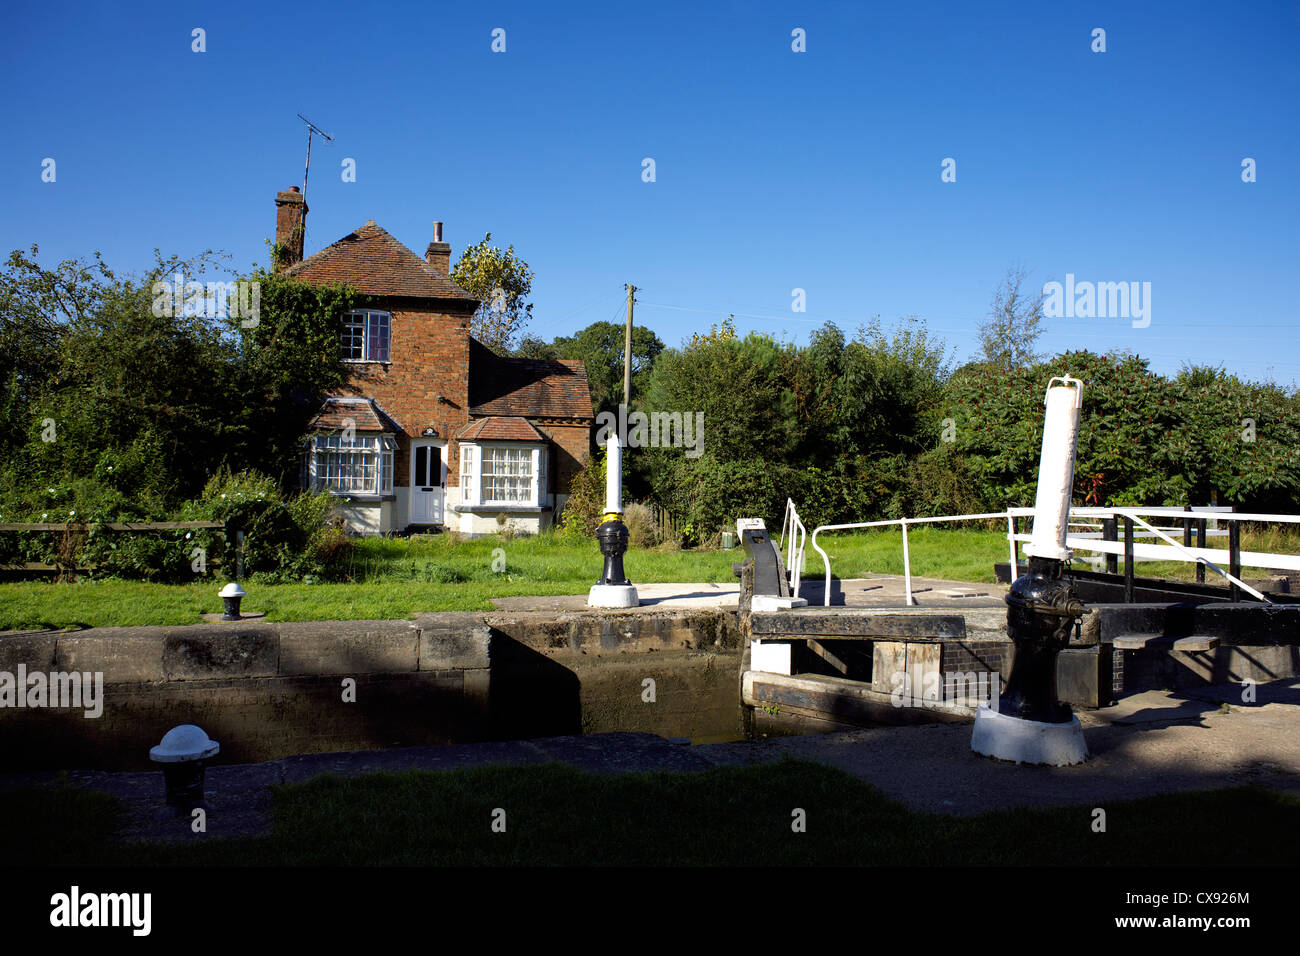 Hatton Top Lock on, the, Grand Union Canal, Warwickshire, England, UK, British, inland, waterways, canals, English, countryside, Stock Photo